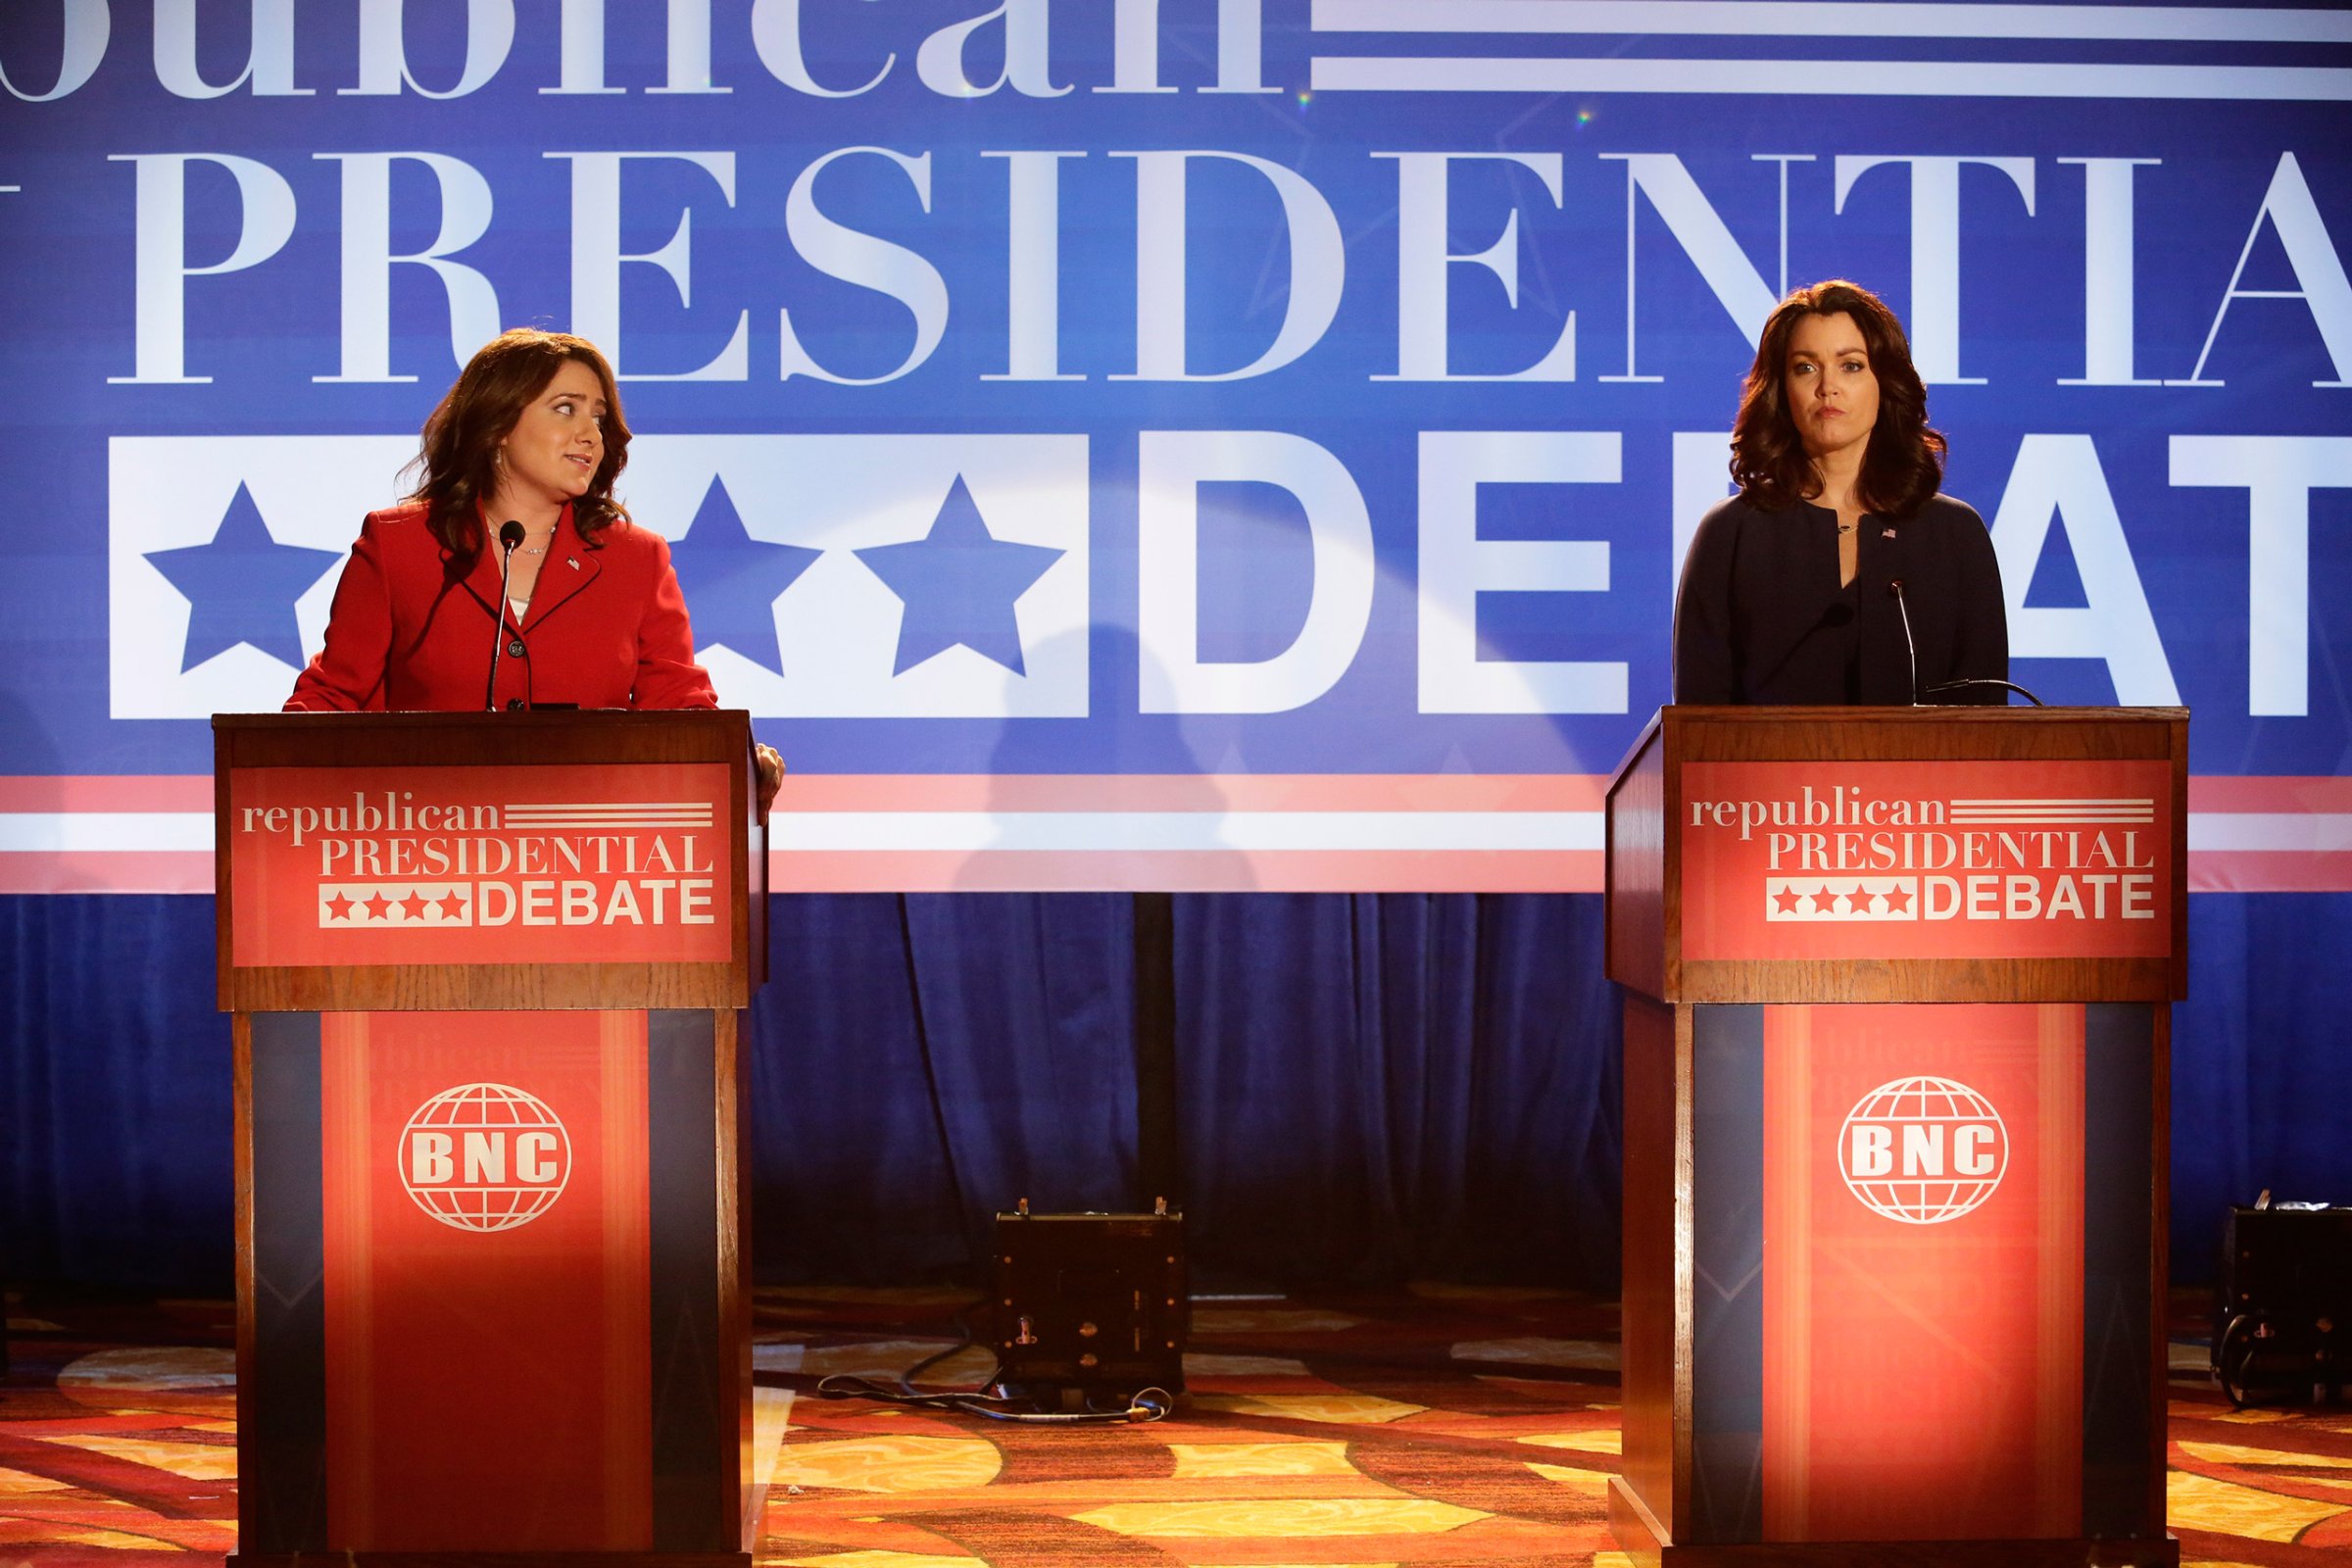 SCANDAL - "Buckle Up" - As Mellie, Susan and Hollis prepare to meet with Florida's governor and vie for her influential endorsement, a spin war between Abby and Olivia threatens to keep their candidates grounded. Meanwhile, Cyrus is faced with a decision that could dramatically alter his future, on ABC's "Scandal," THURSDAY, APRIL 28 (9:00-10:00 p.m. EDT), on the ABC Television Network. (ABC/Nicole Wilder) ARTEMIS PEBDANI, BELLAMY YOUNG